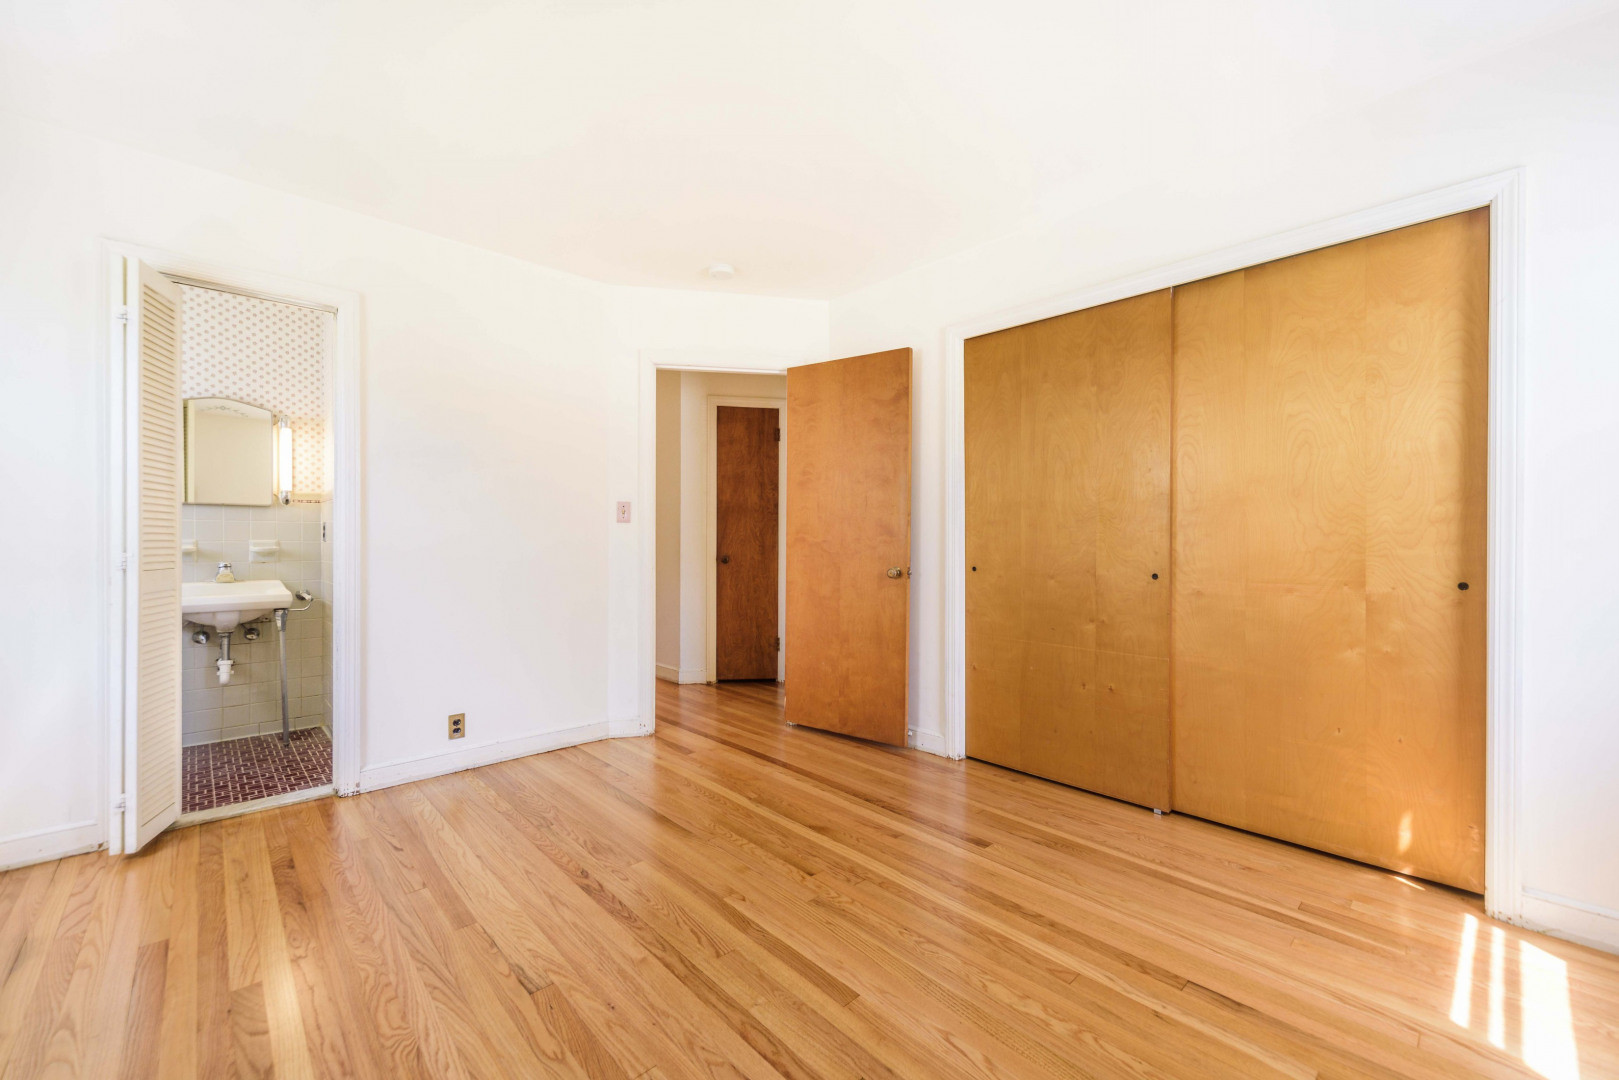 30 Awesome Hardwood Floor Refinishing Fairfield Ct 2024 free download hardwood floor refinishing fairfield ct of 6 caldwell avenue stamford ct for sale william pitt sothebys realty with regard to 14868176 16 017 233896 dsc8798 5152657